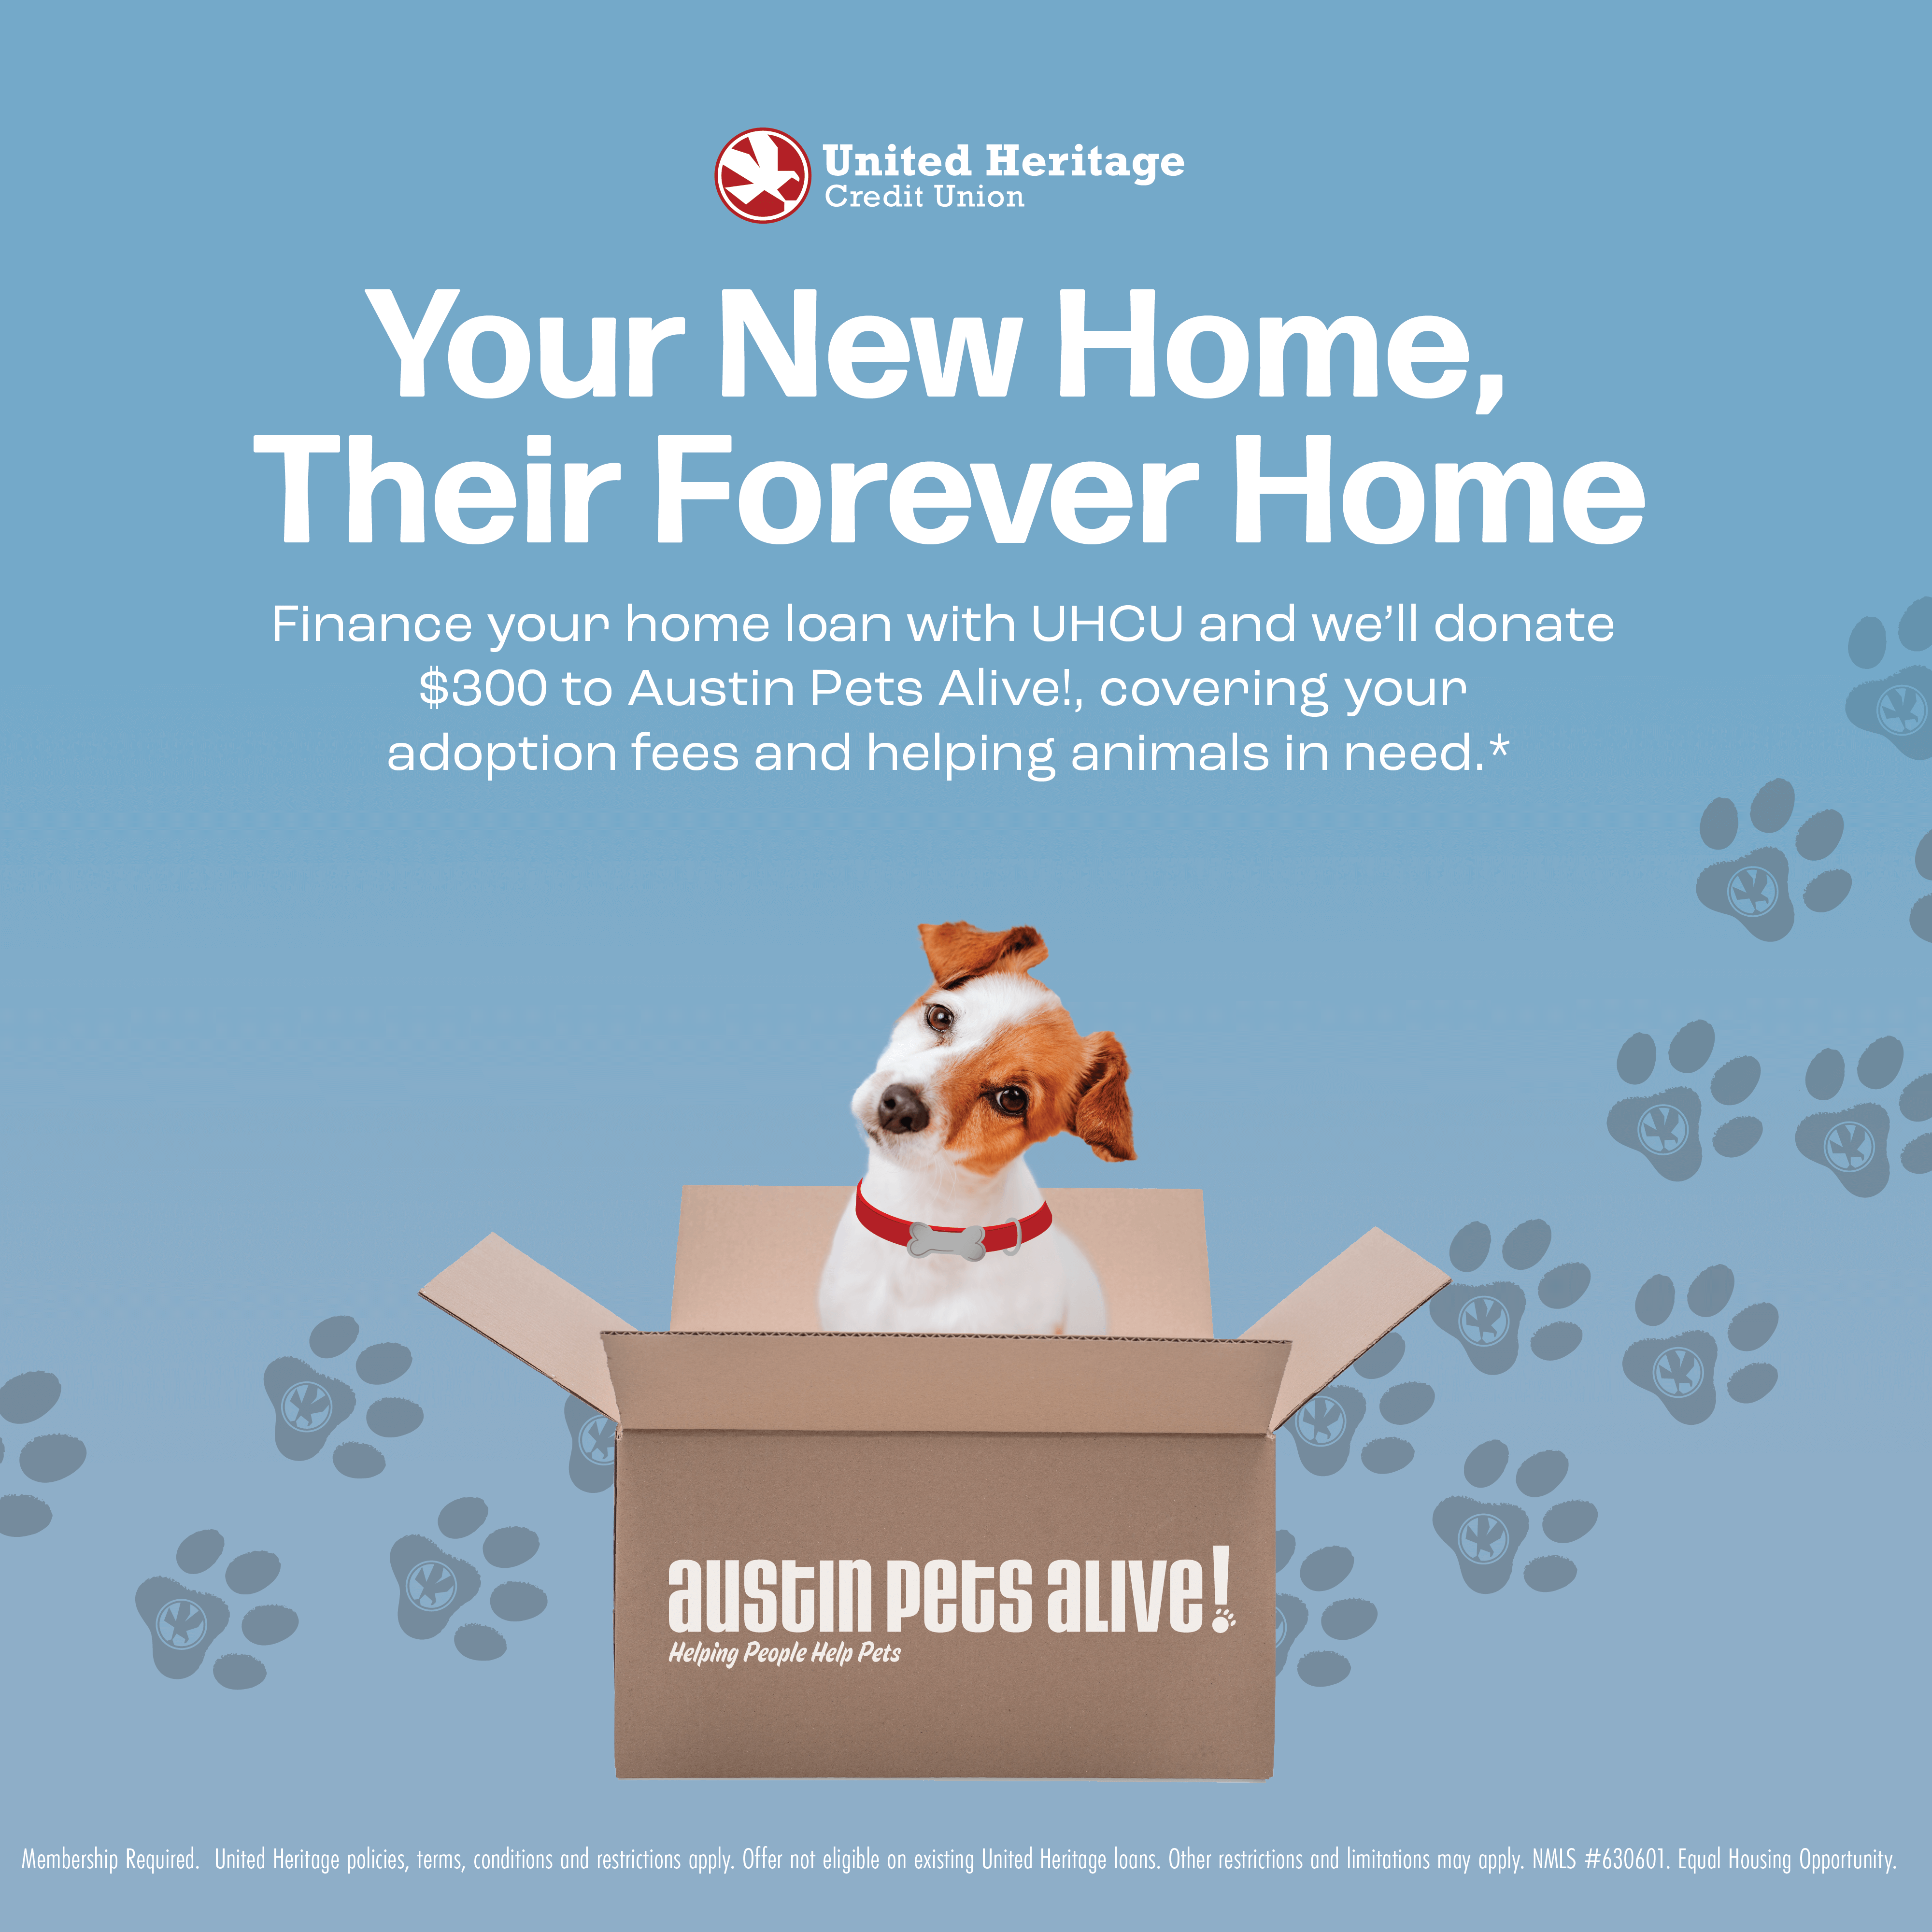 YOUR NEW HOME, THEIR FOREVER HOME